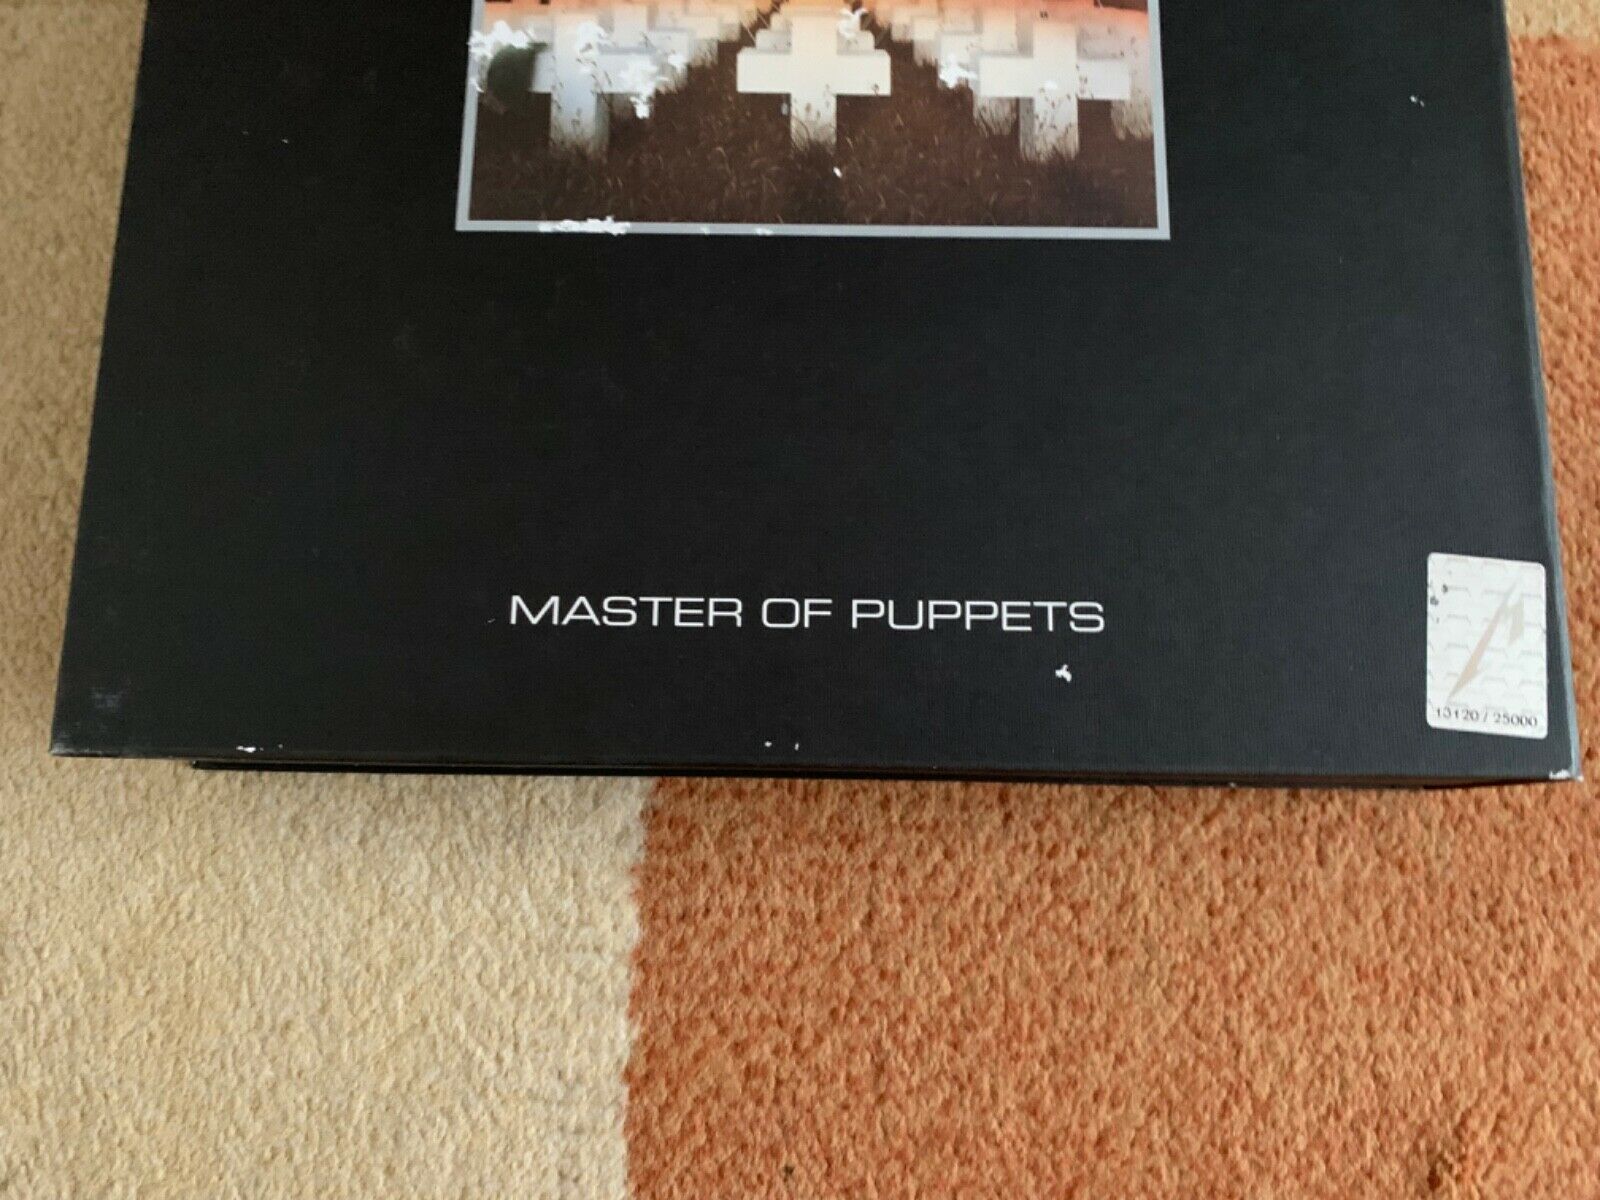 popsike.com - Metallica Master of Puppets Remastered Deluxe Box